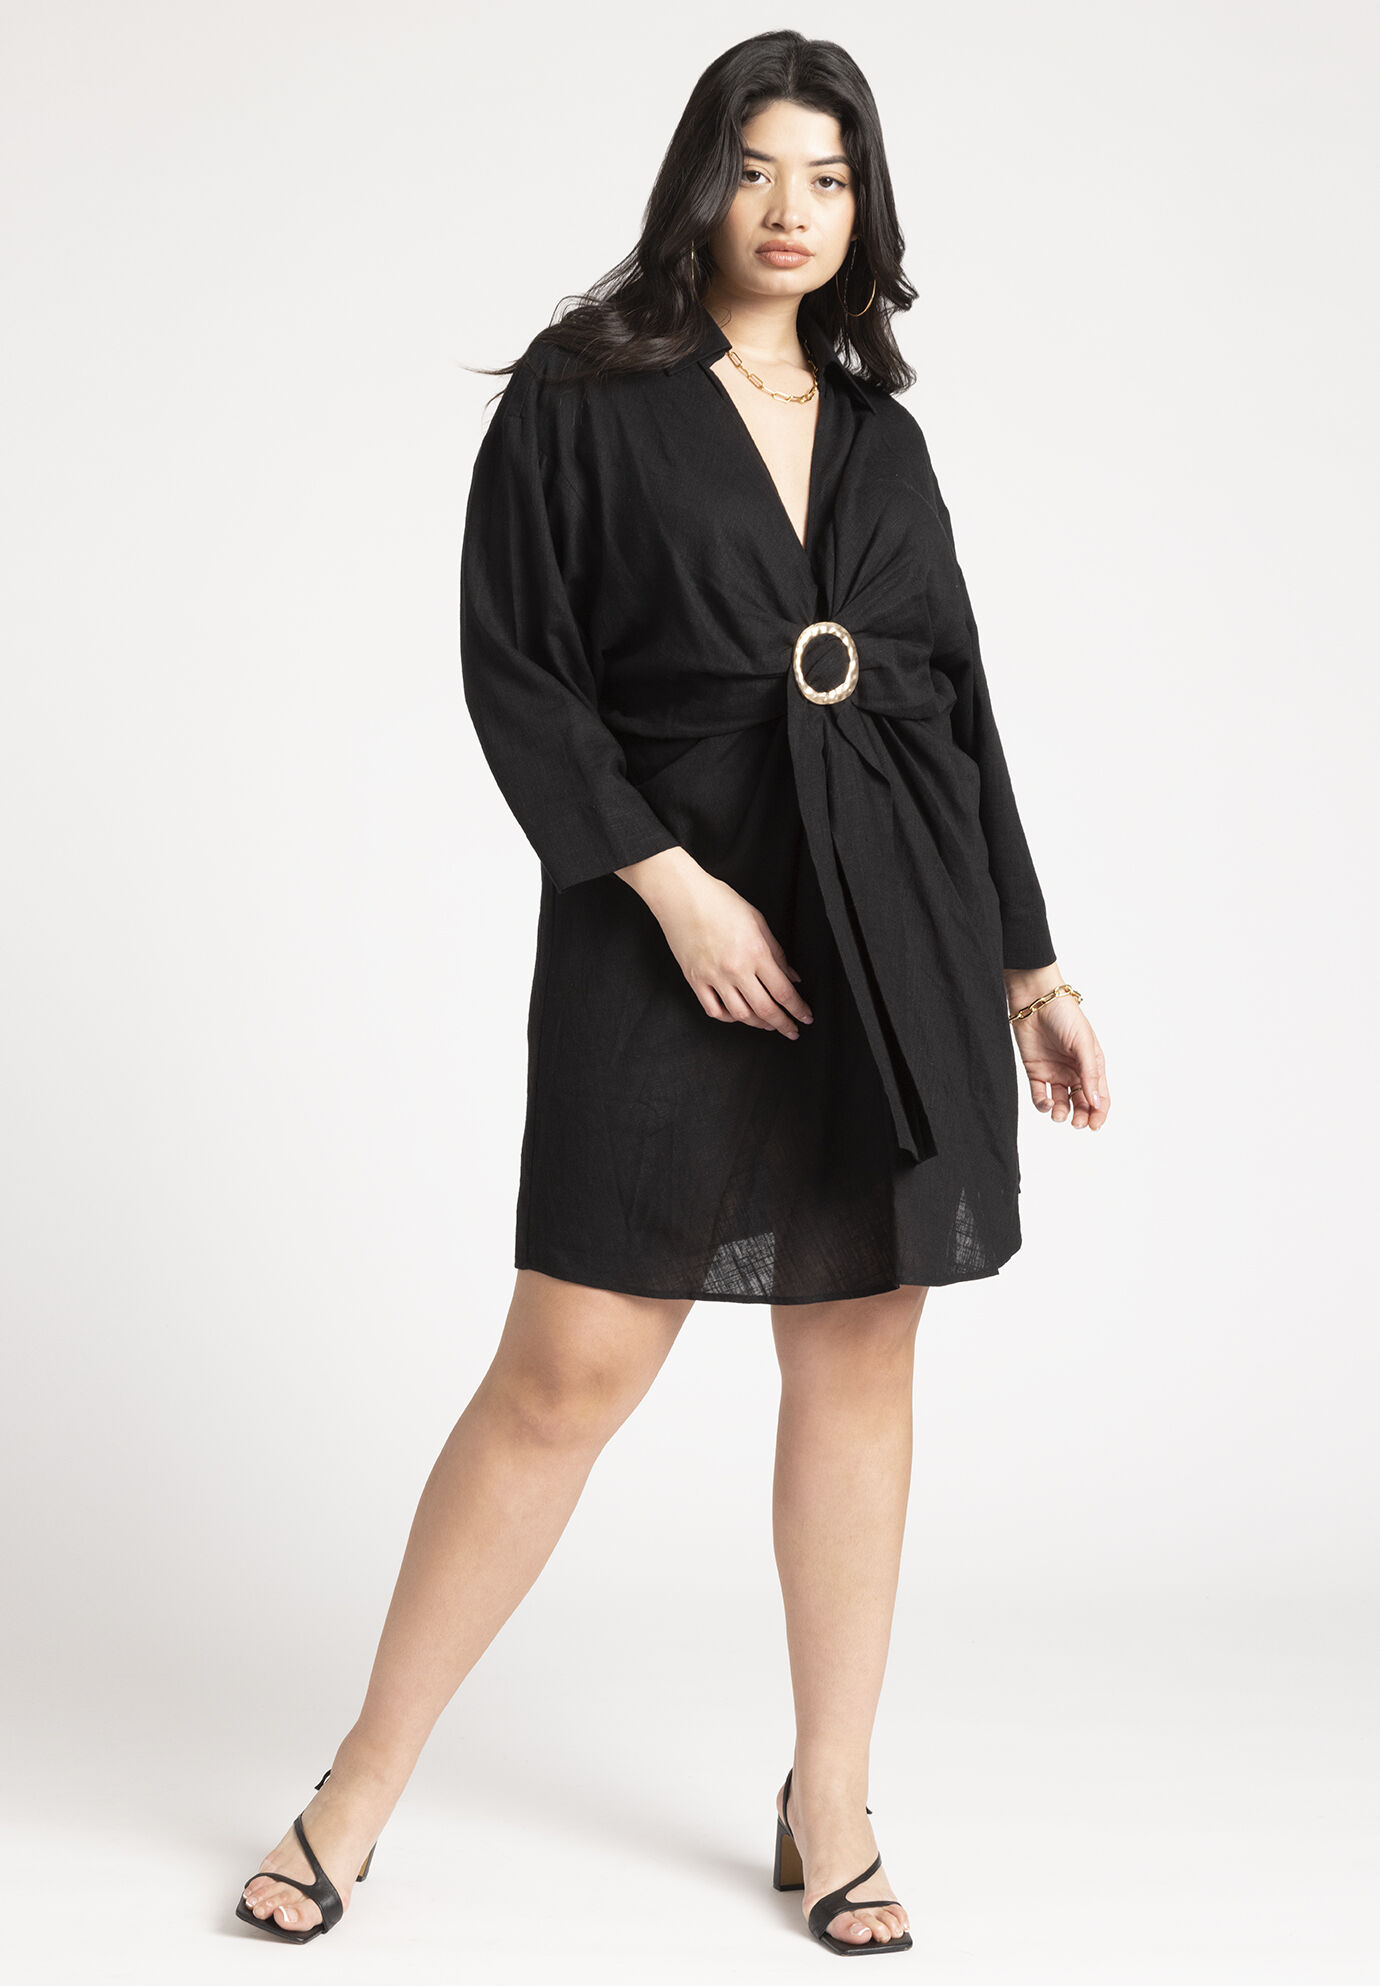 Plus Size Short Collared Dolman Long Sleeves Cover Up/Tunic